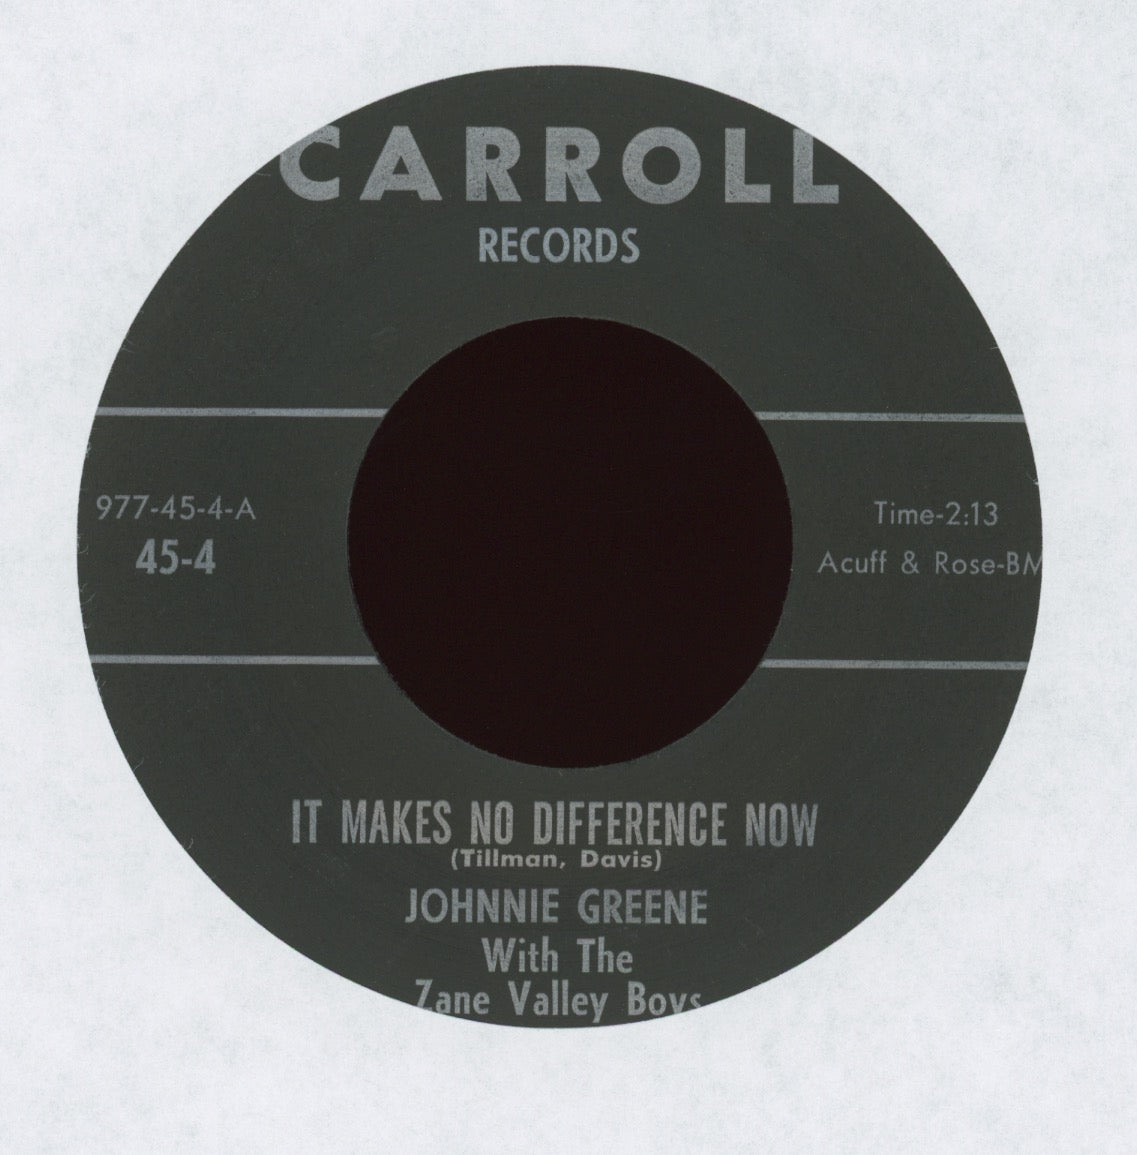 Johnnie Greene - It Makes No Difference Now on Carroll